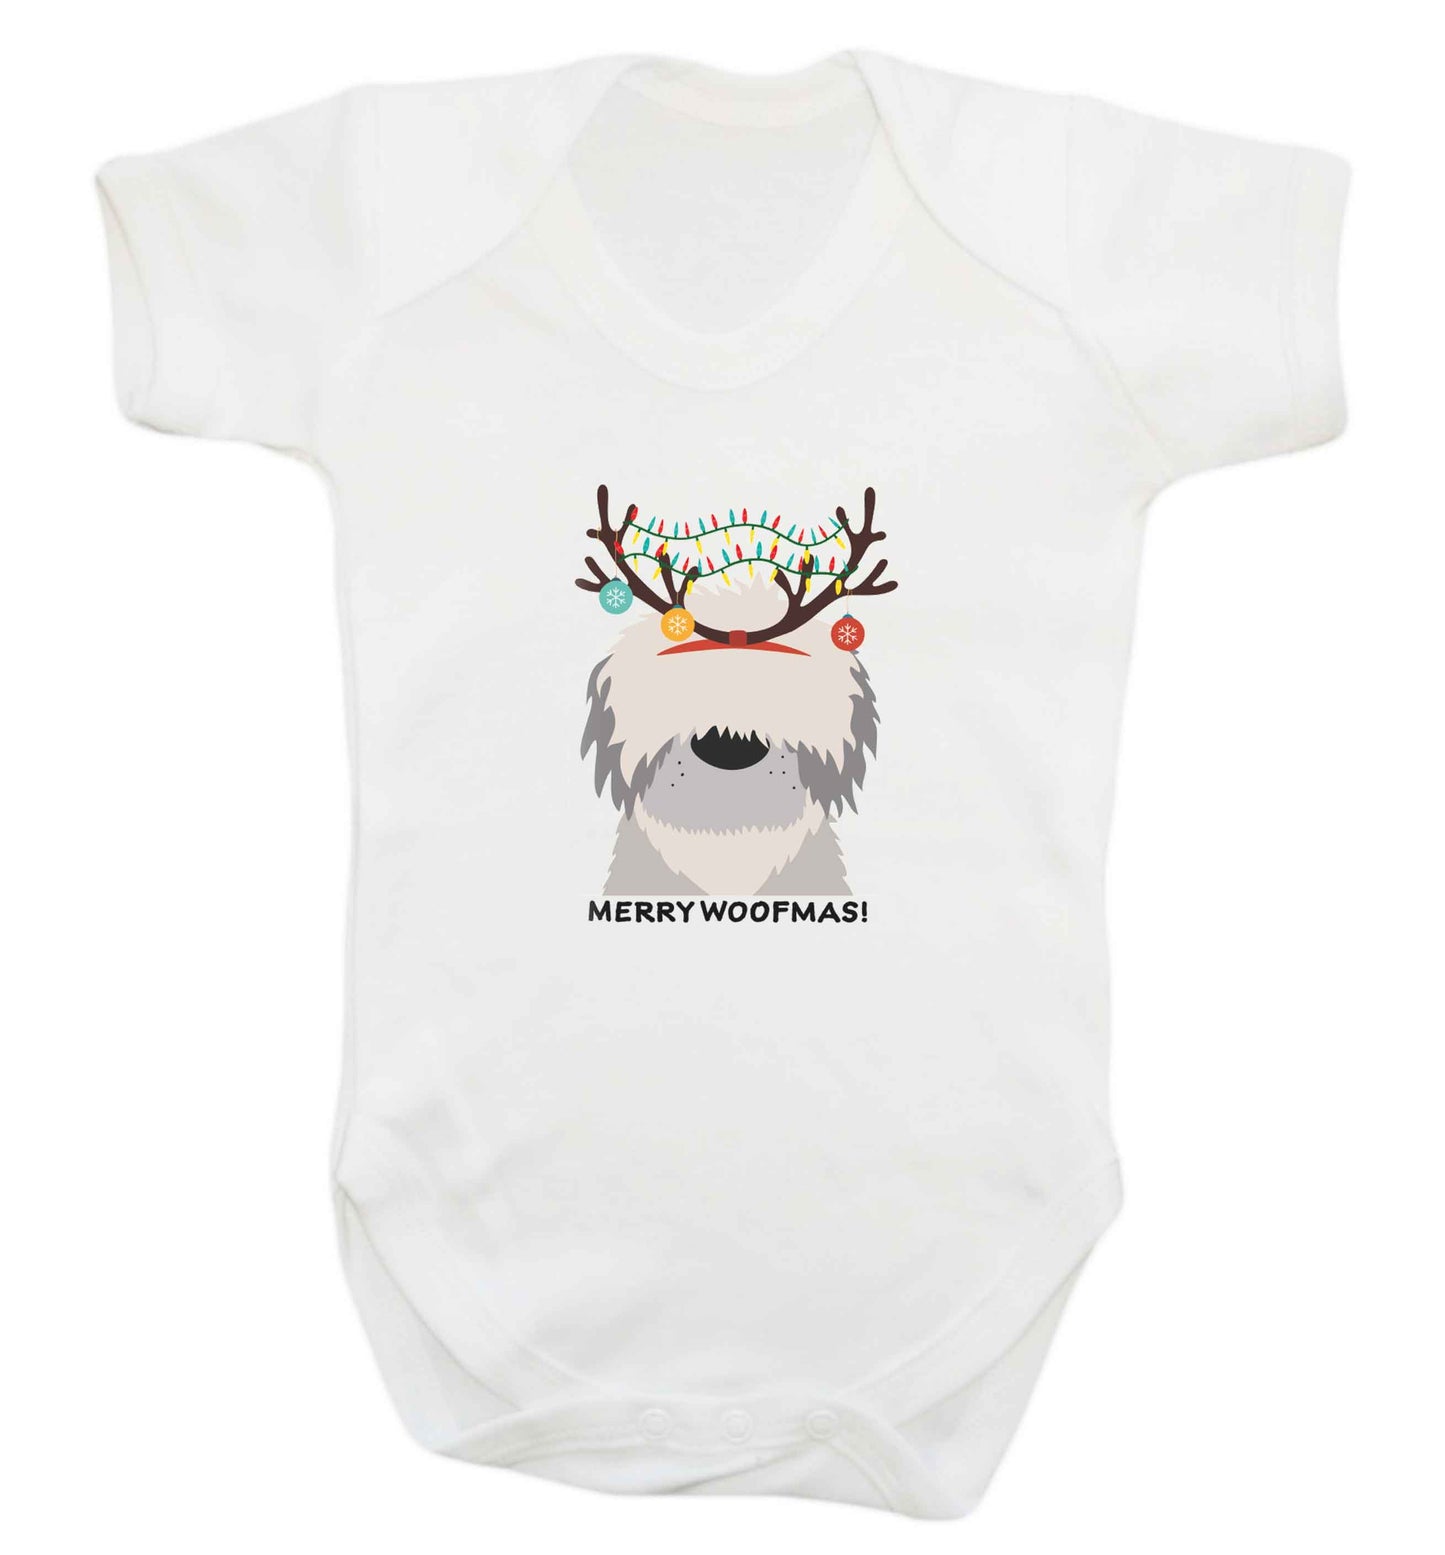 Merry Woofmas! baby vest white 18-24 months